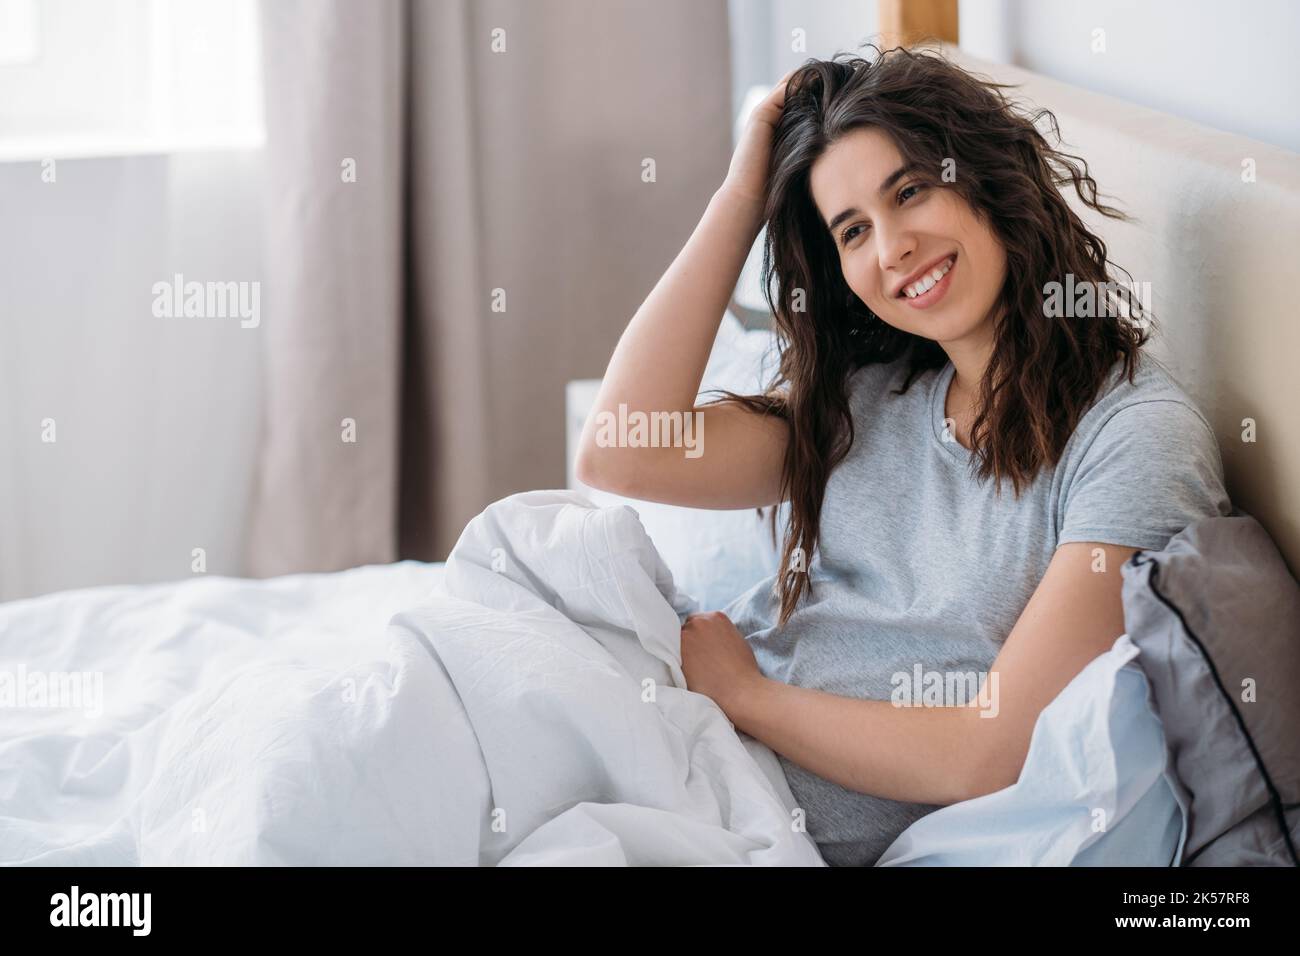 Lazy morning. Weekend relaxation. Home leisure. Happy cheerful brunette woman enjoying rest sitting awake in cozy bed smiling in light bedroom. Stock Photo